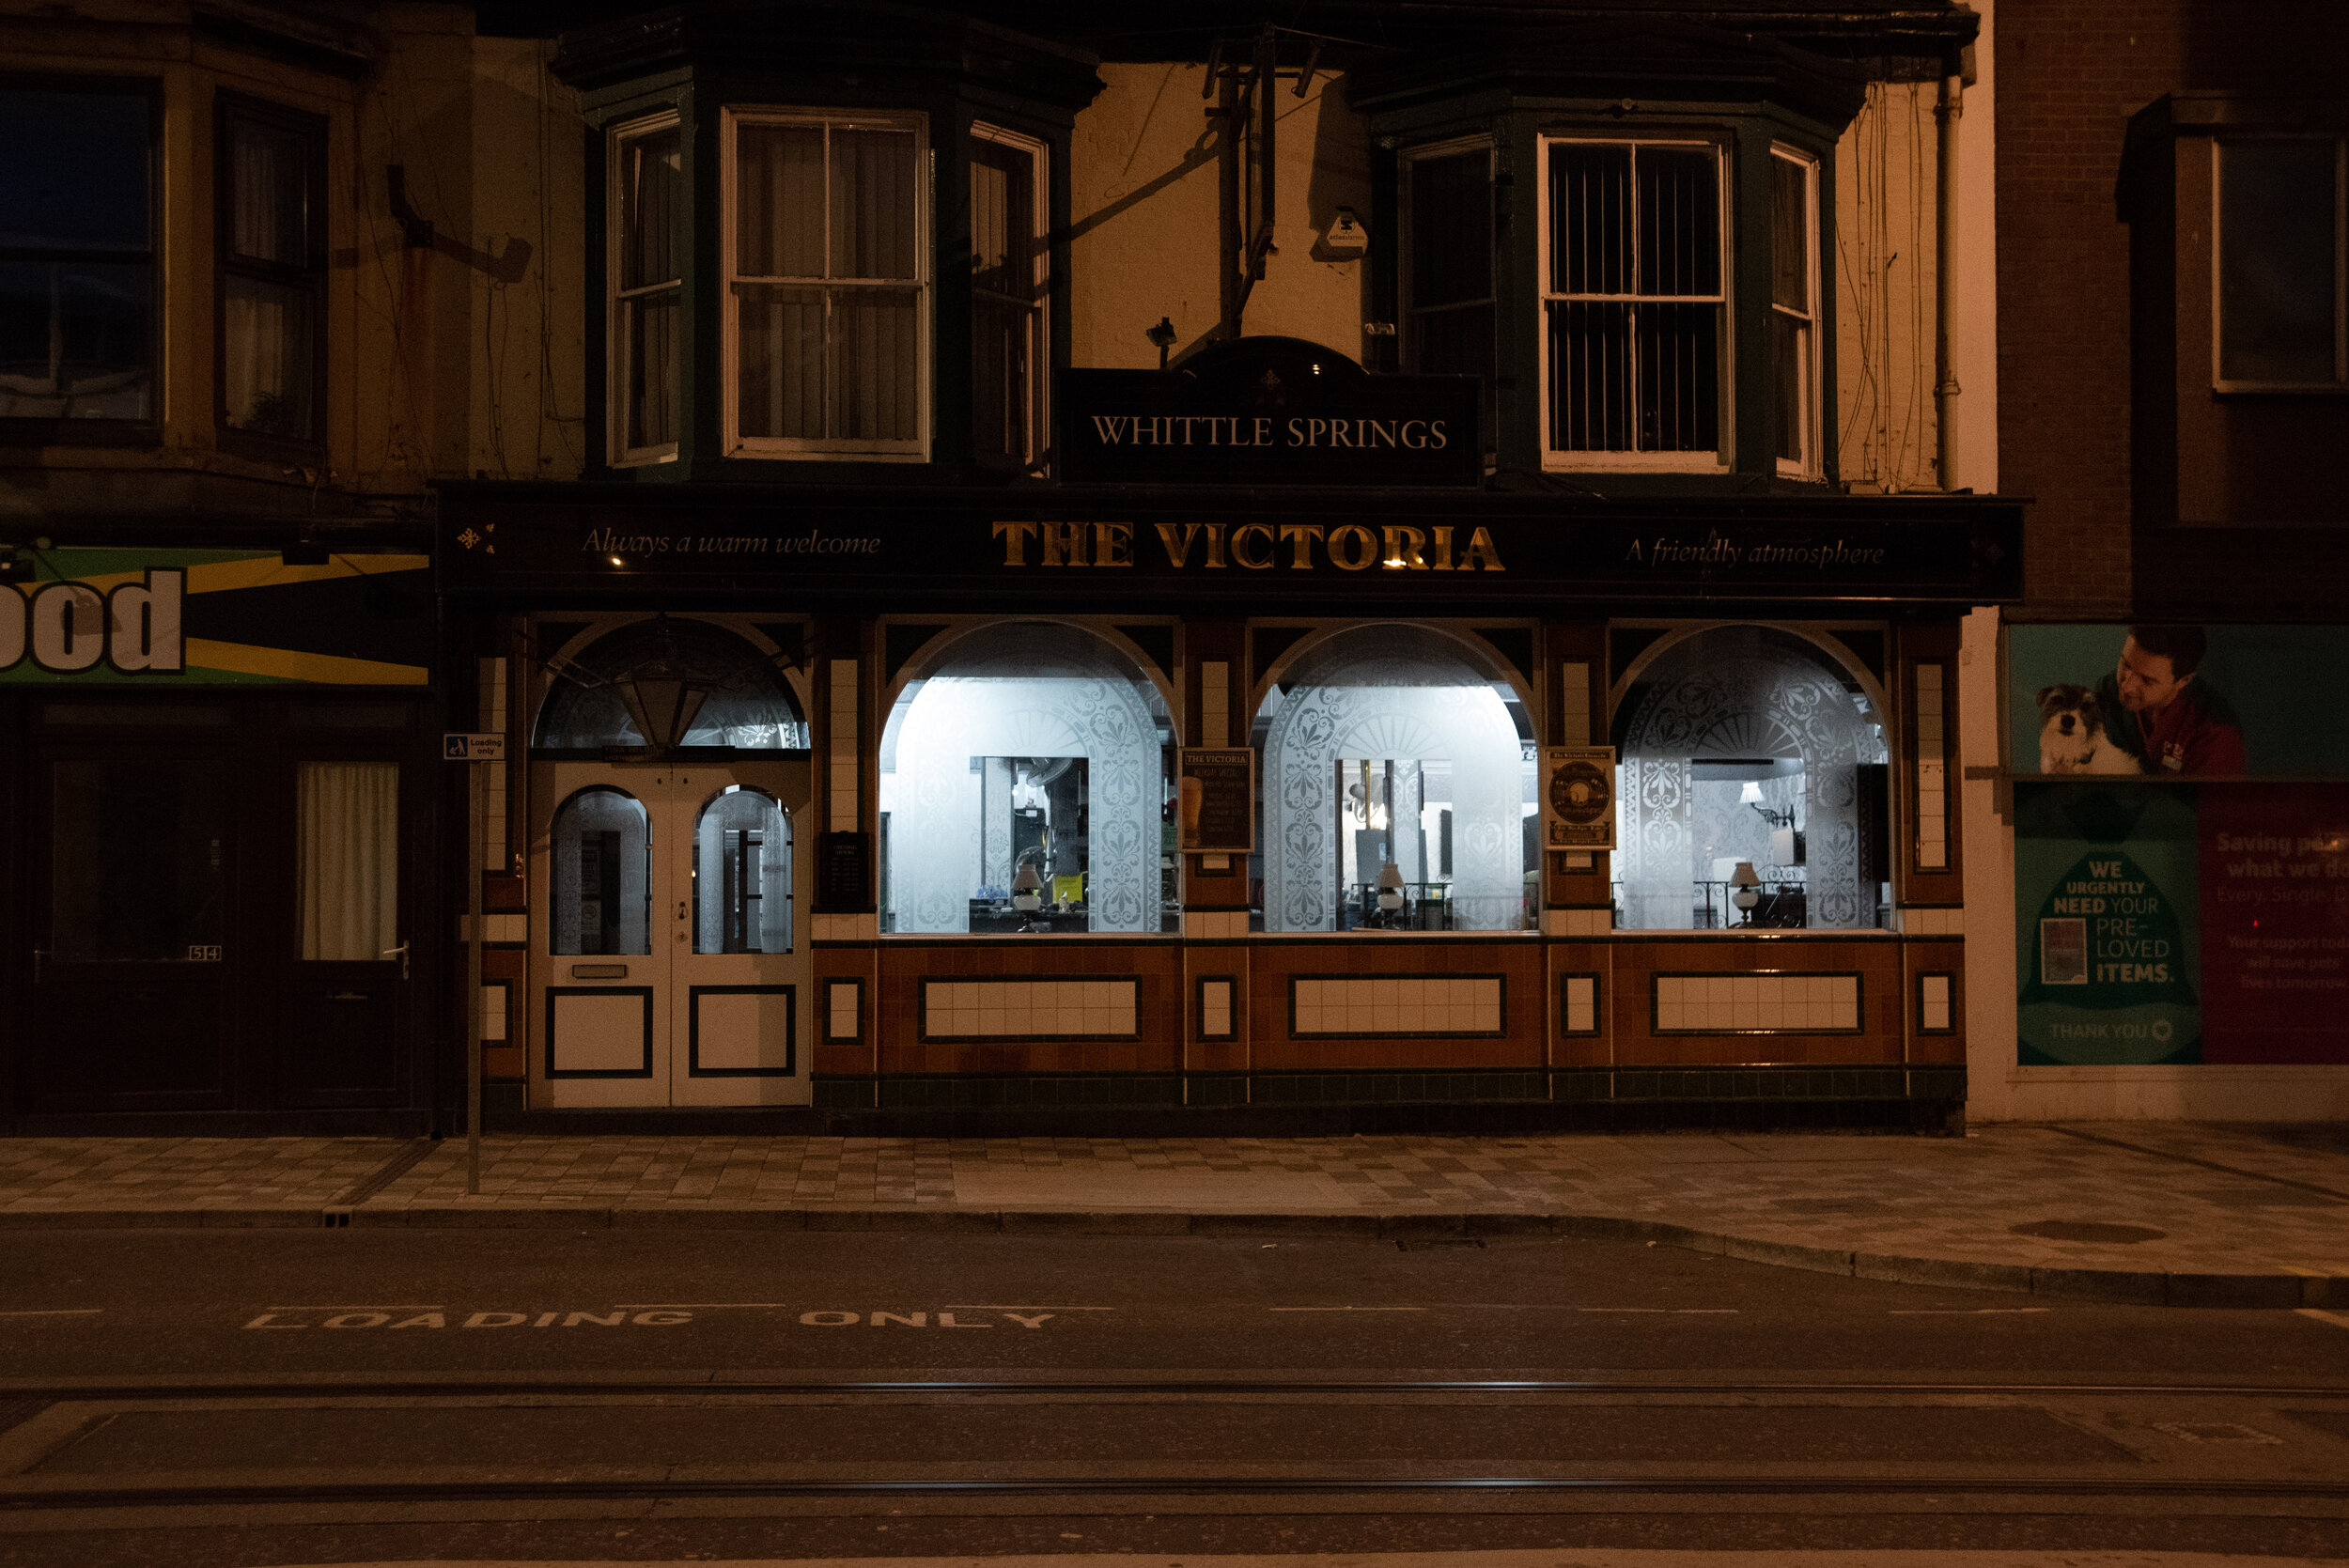 Claire Griffiths April Lockdown 2020 - Pubs in Lockdown and Night Time Blackpool (29).jpg